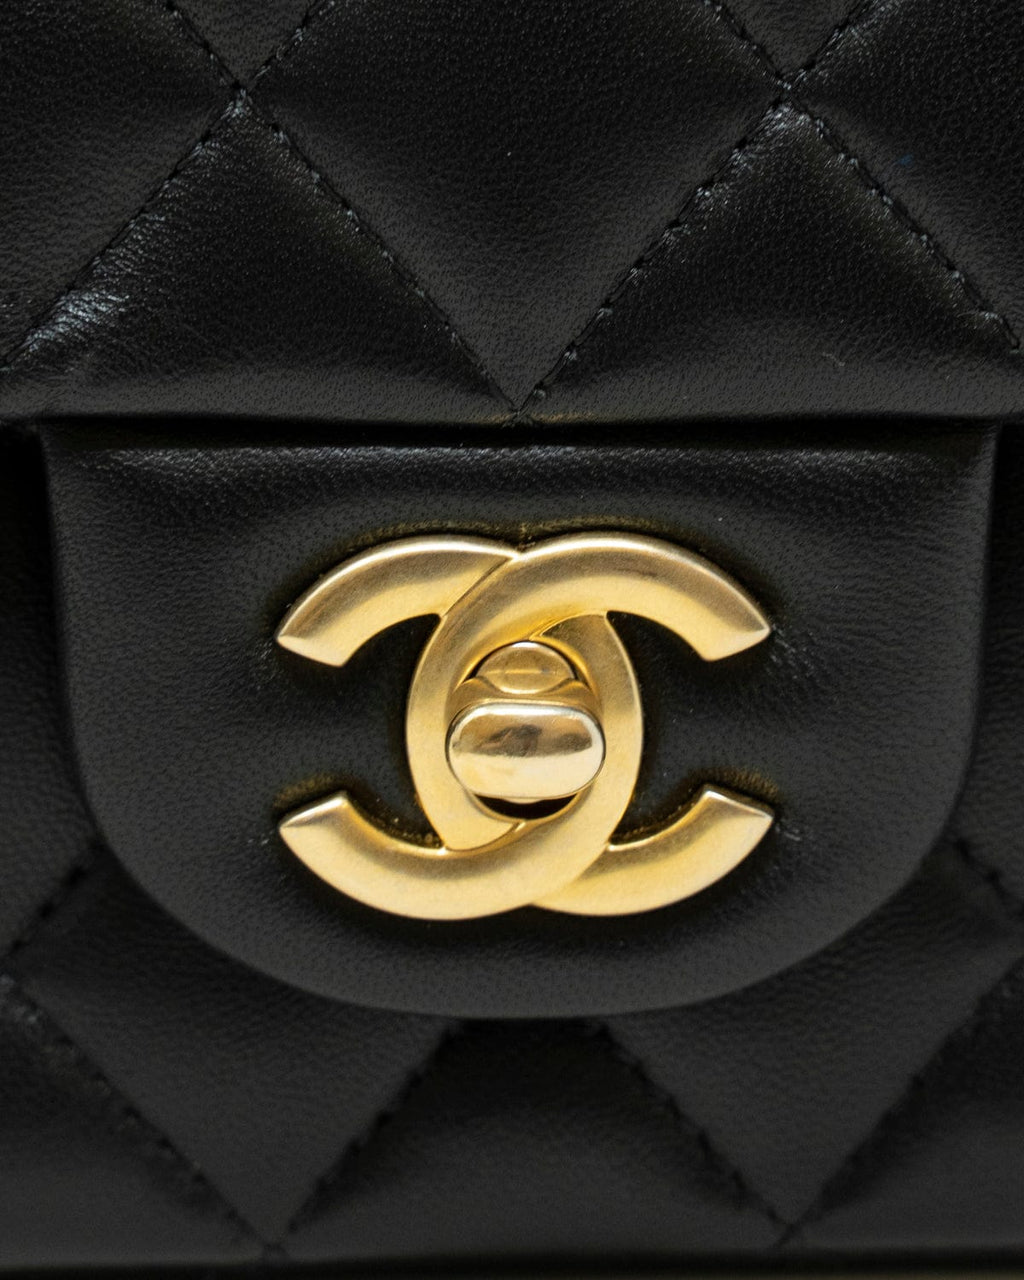 CHANEL MINI FLAP BAG WITH TOP HANDLE